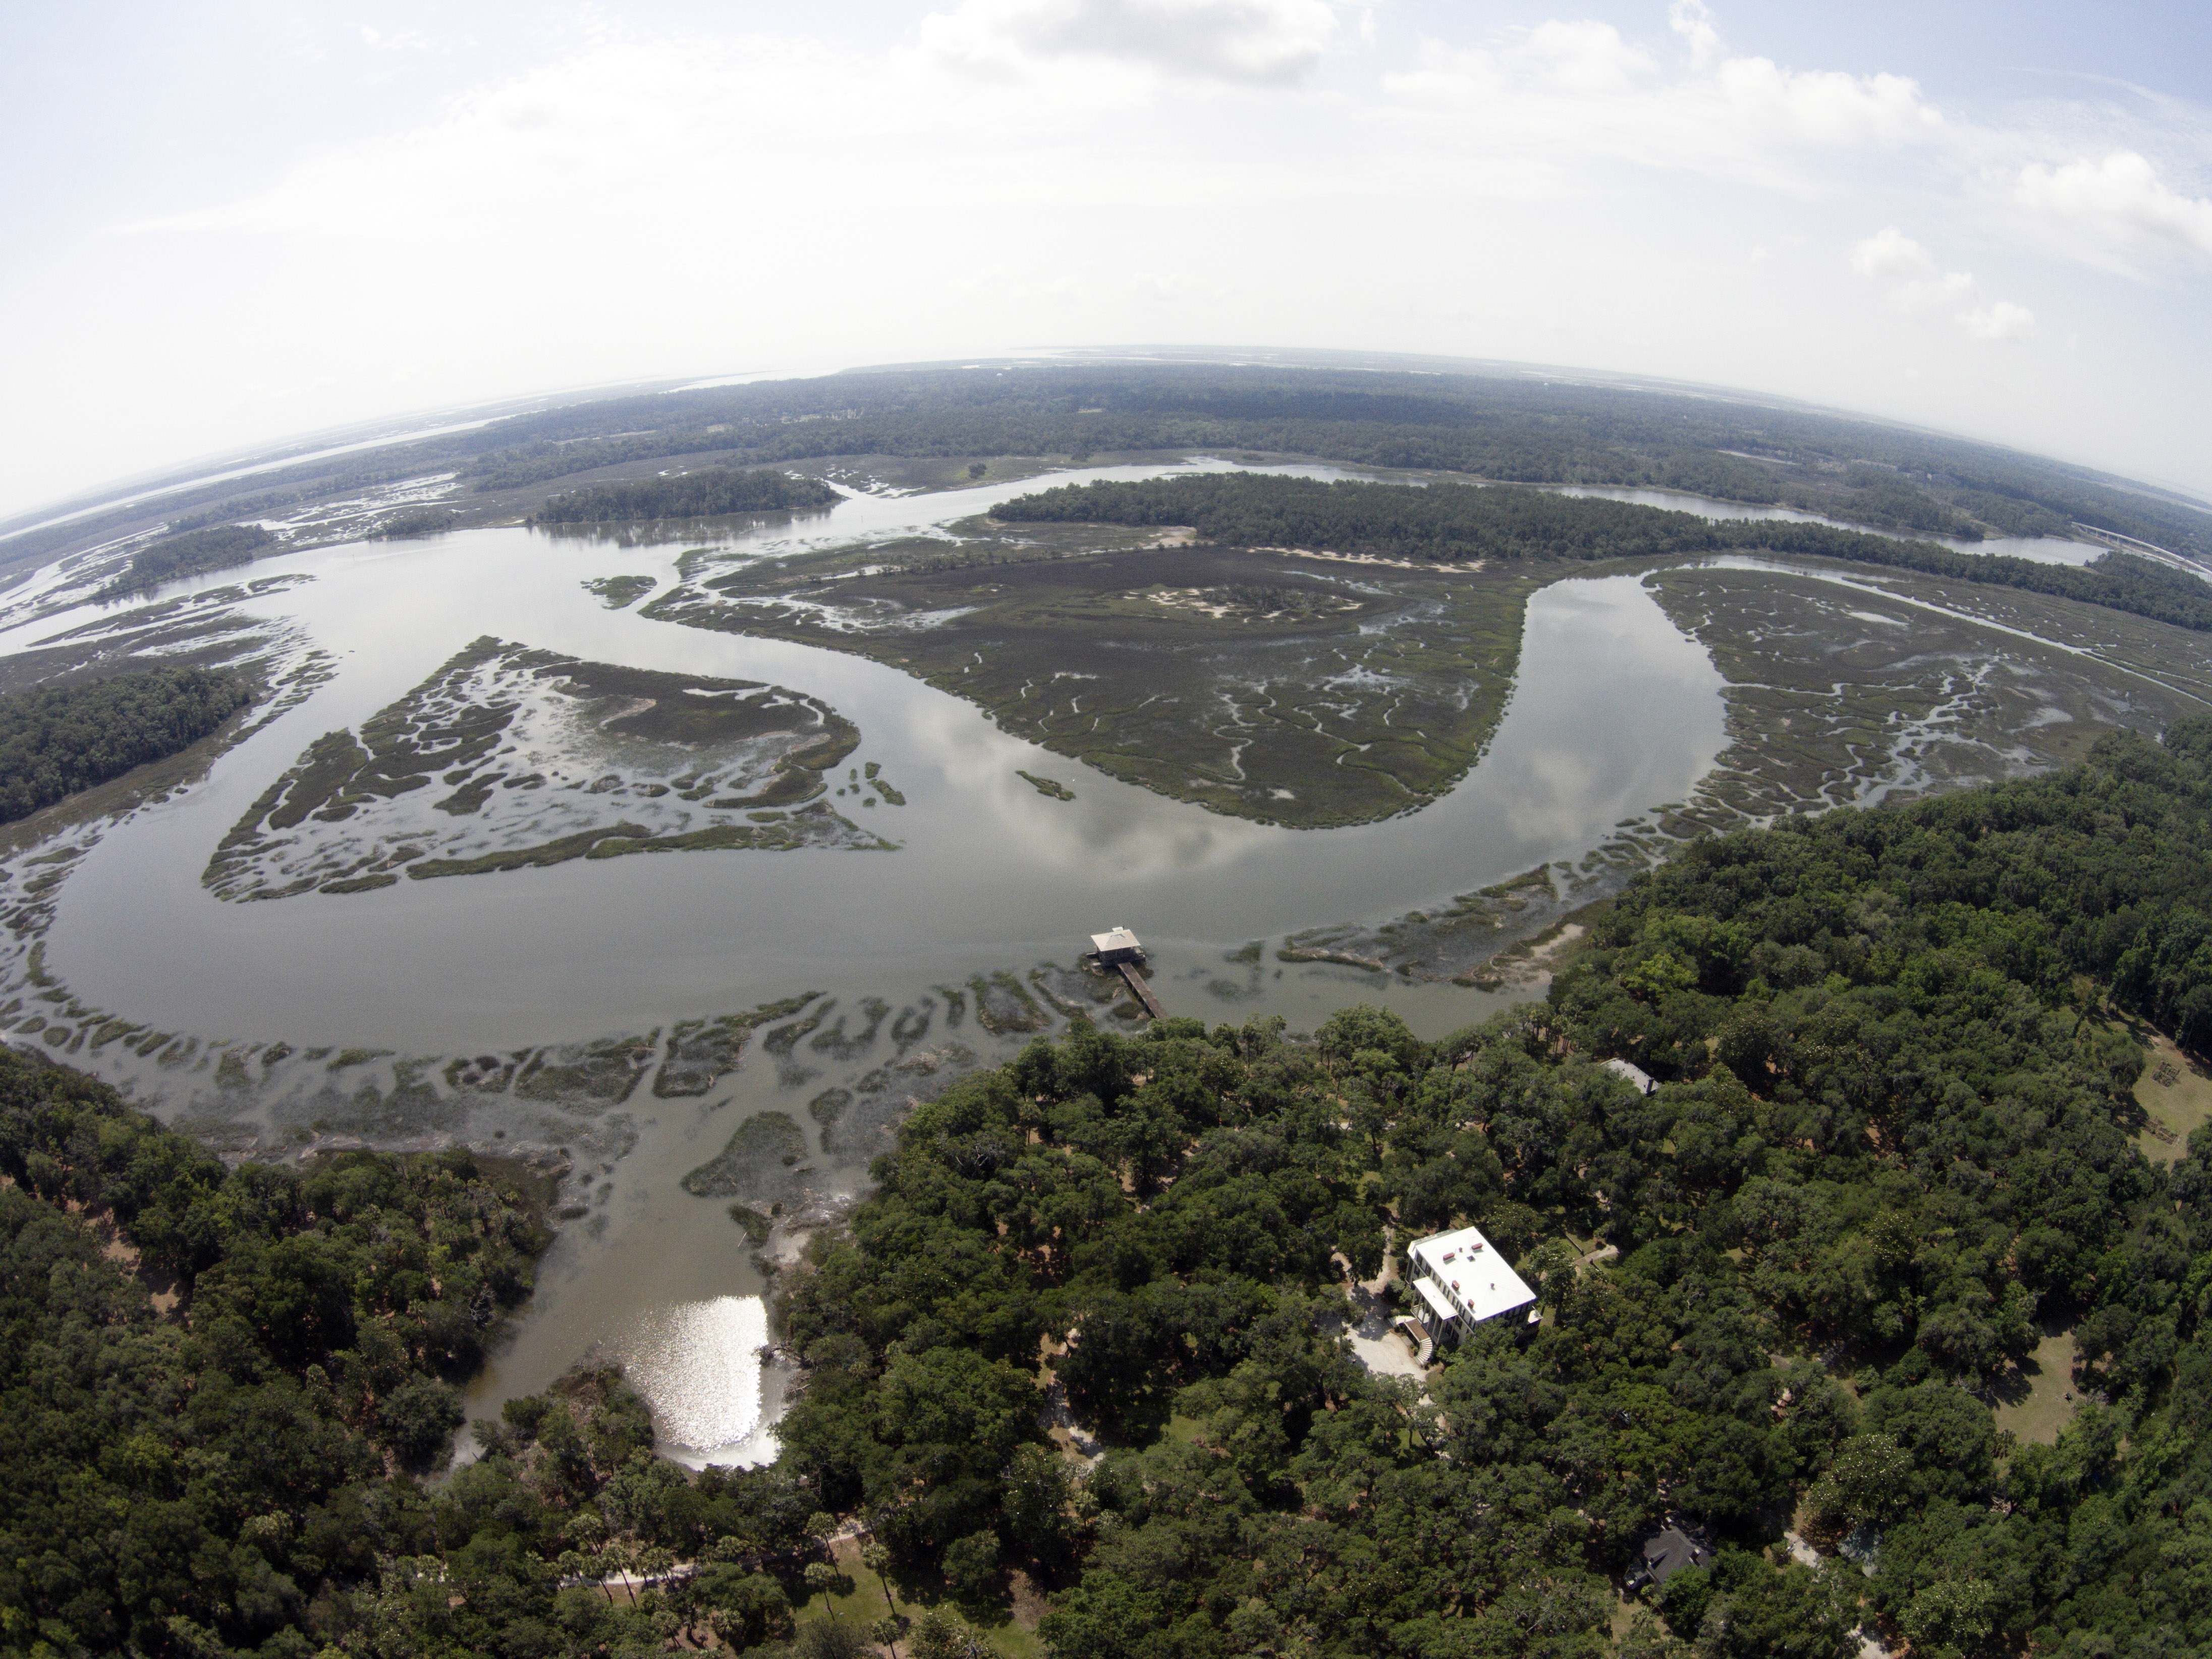 Wormsloe aerial photograph